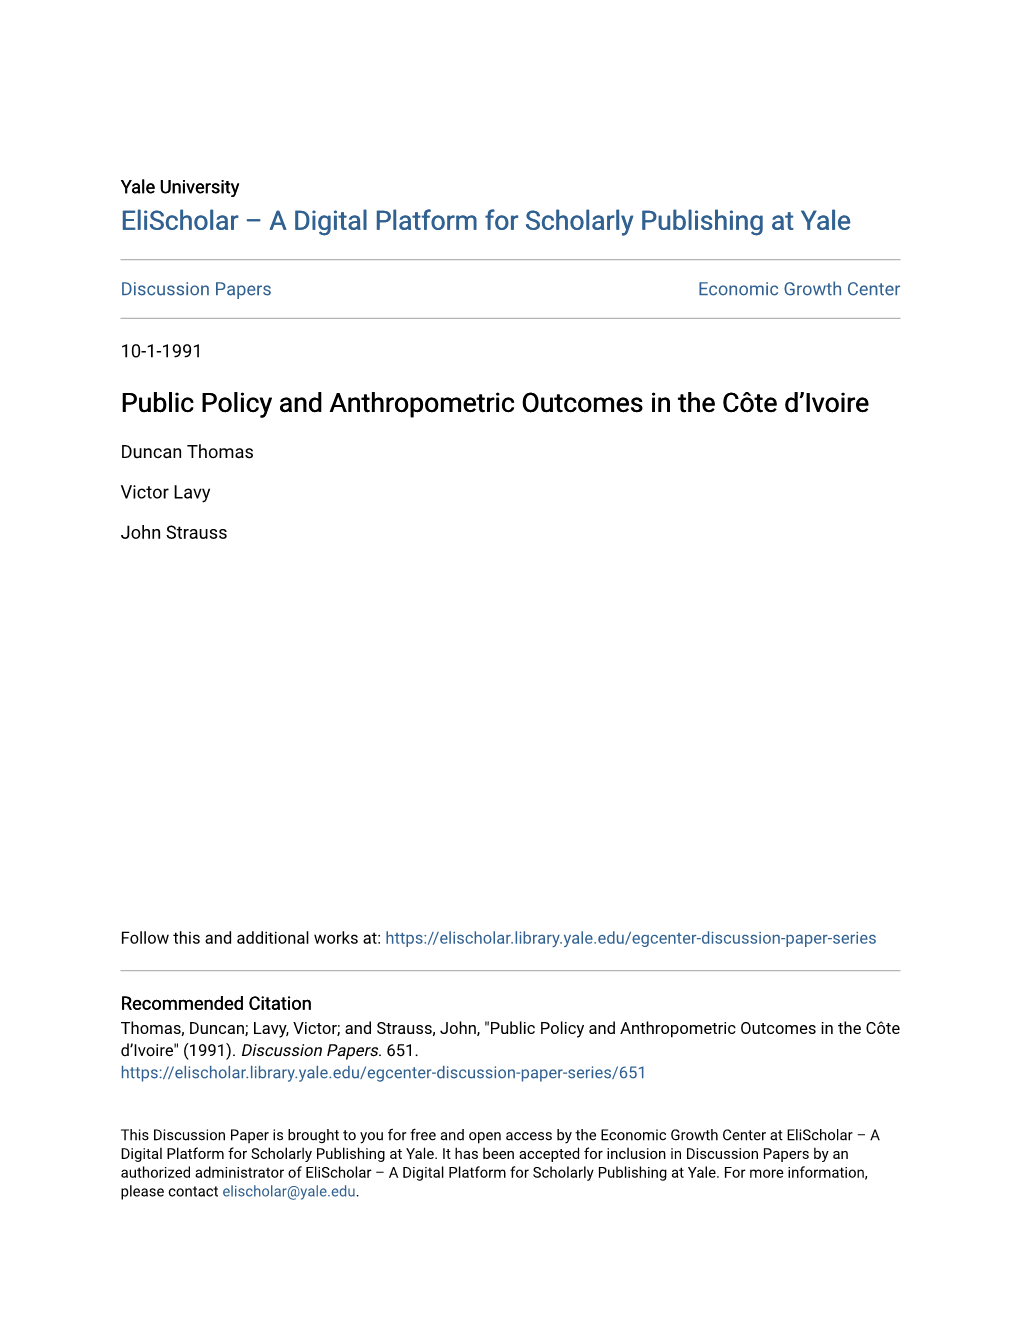 Public Policy and Anthropometric Outcomes in the Côte D’Ivoire